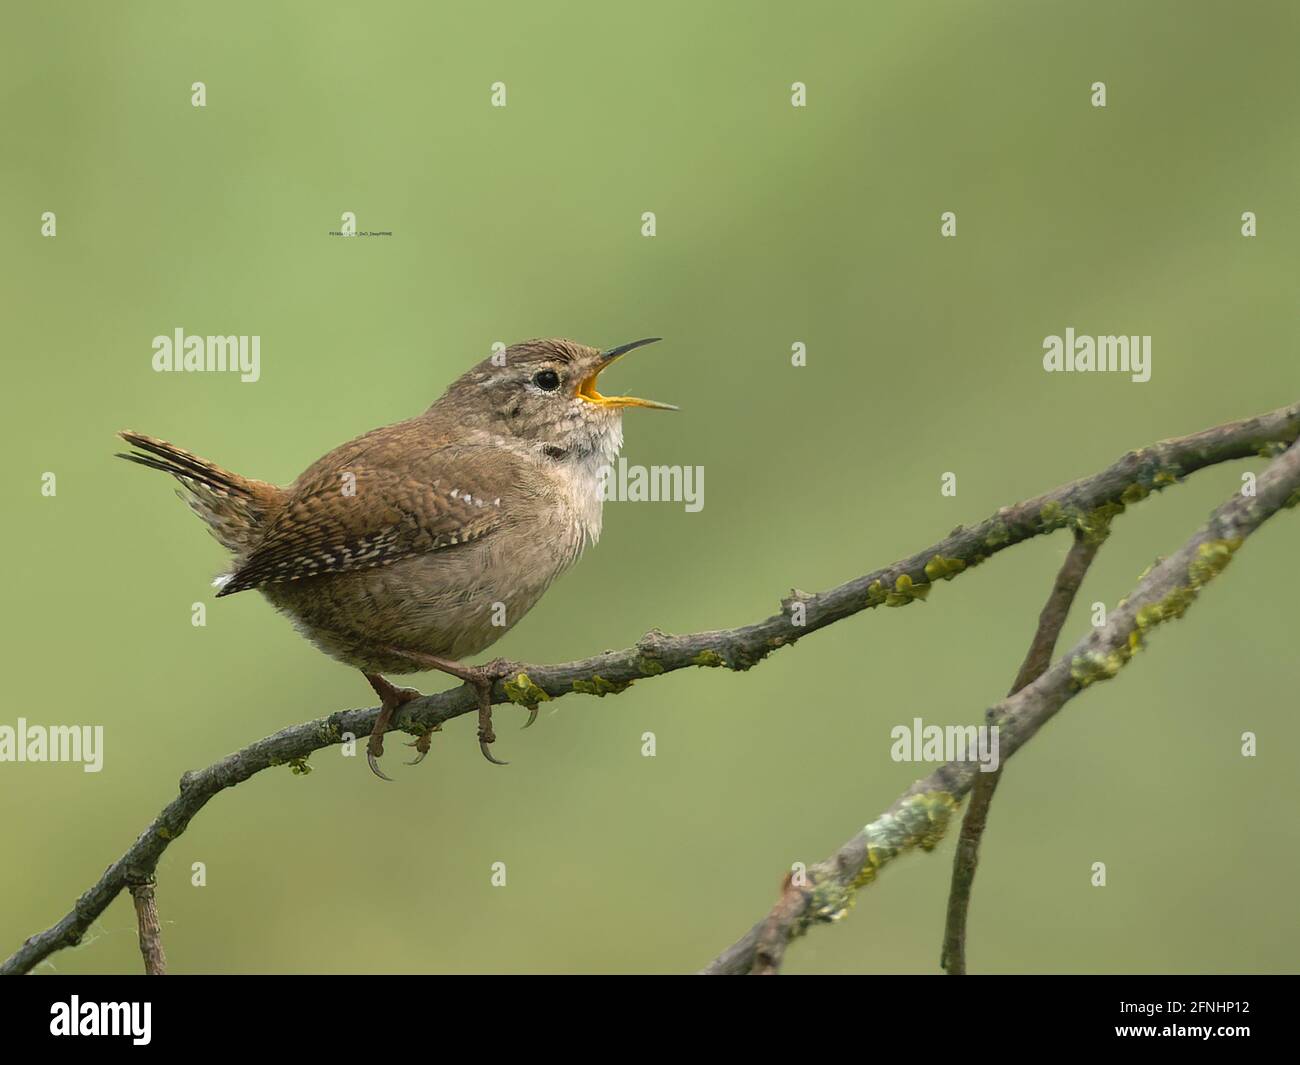 Wren perched and singing Stock Photo